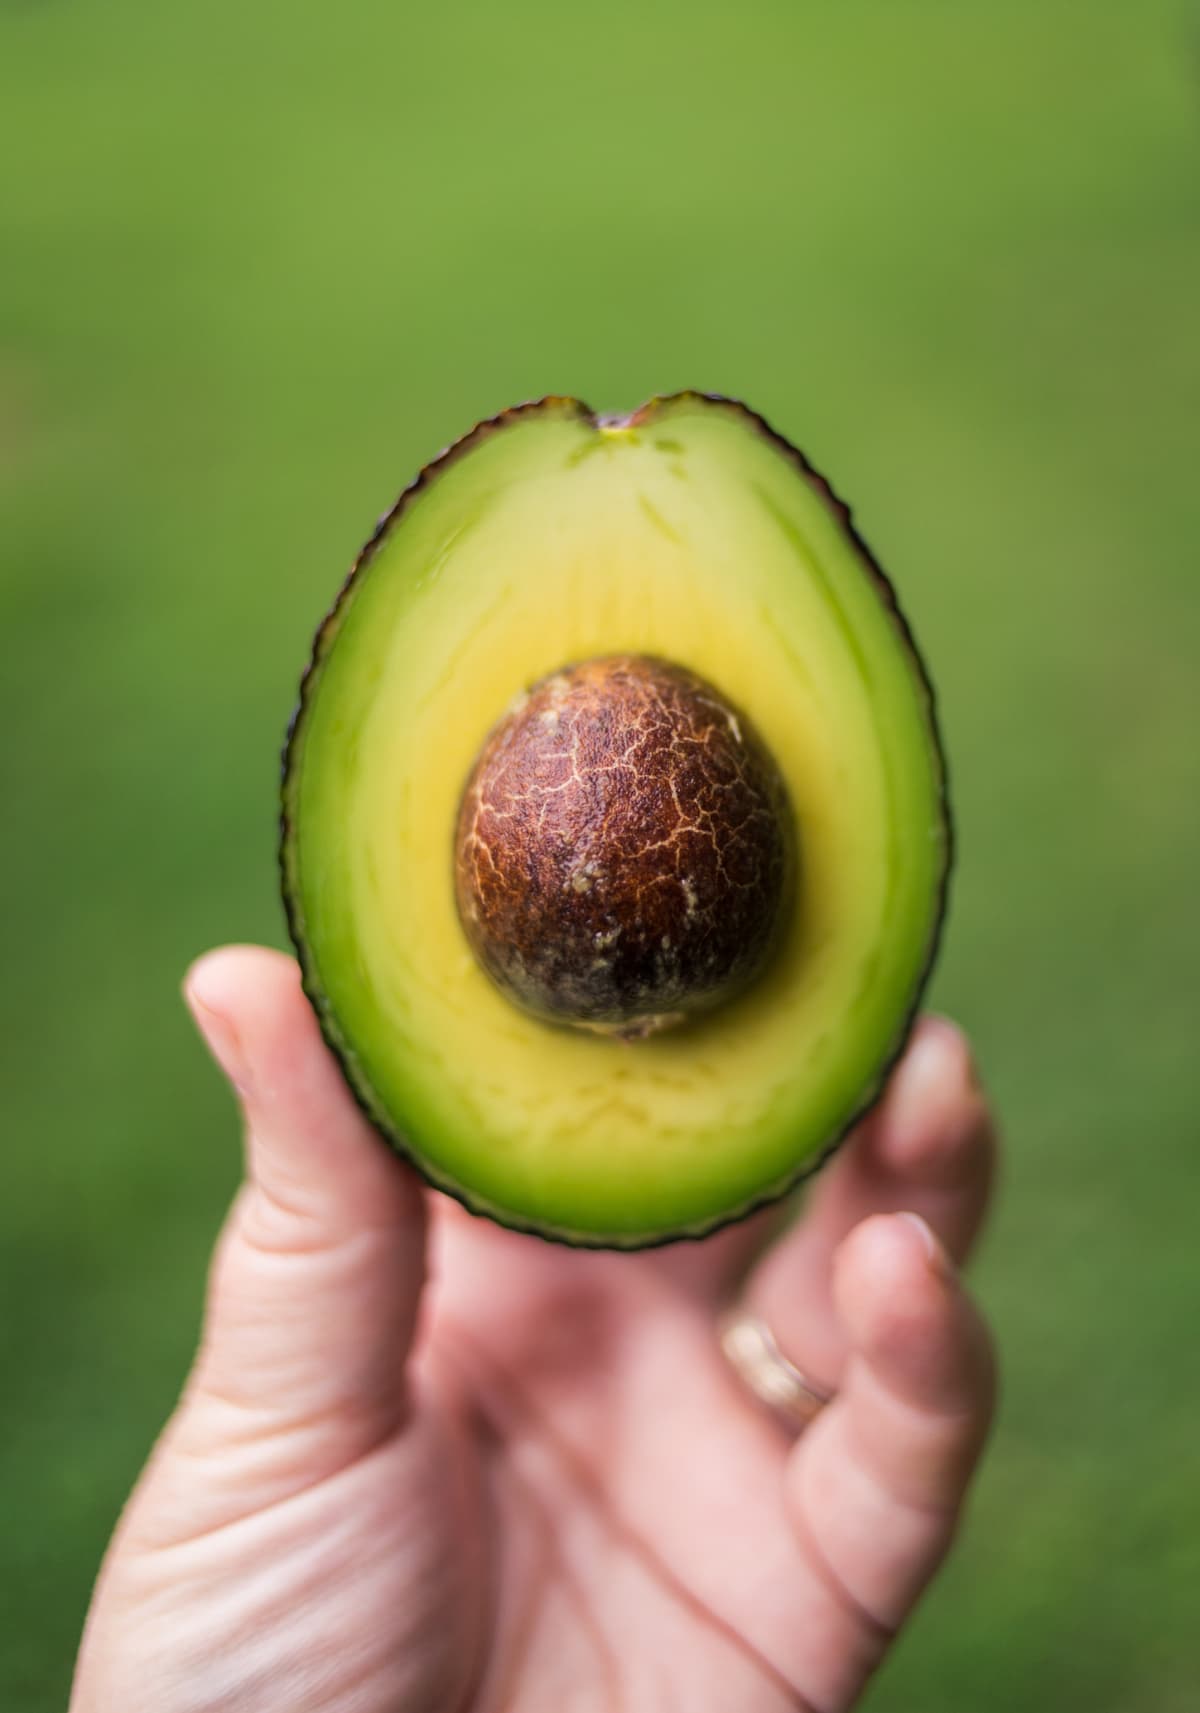 Hand holding an avocado half on a green background